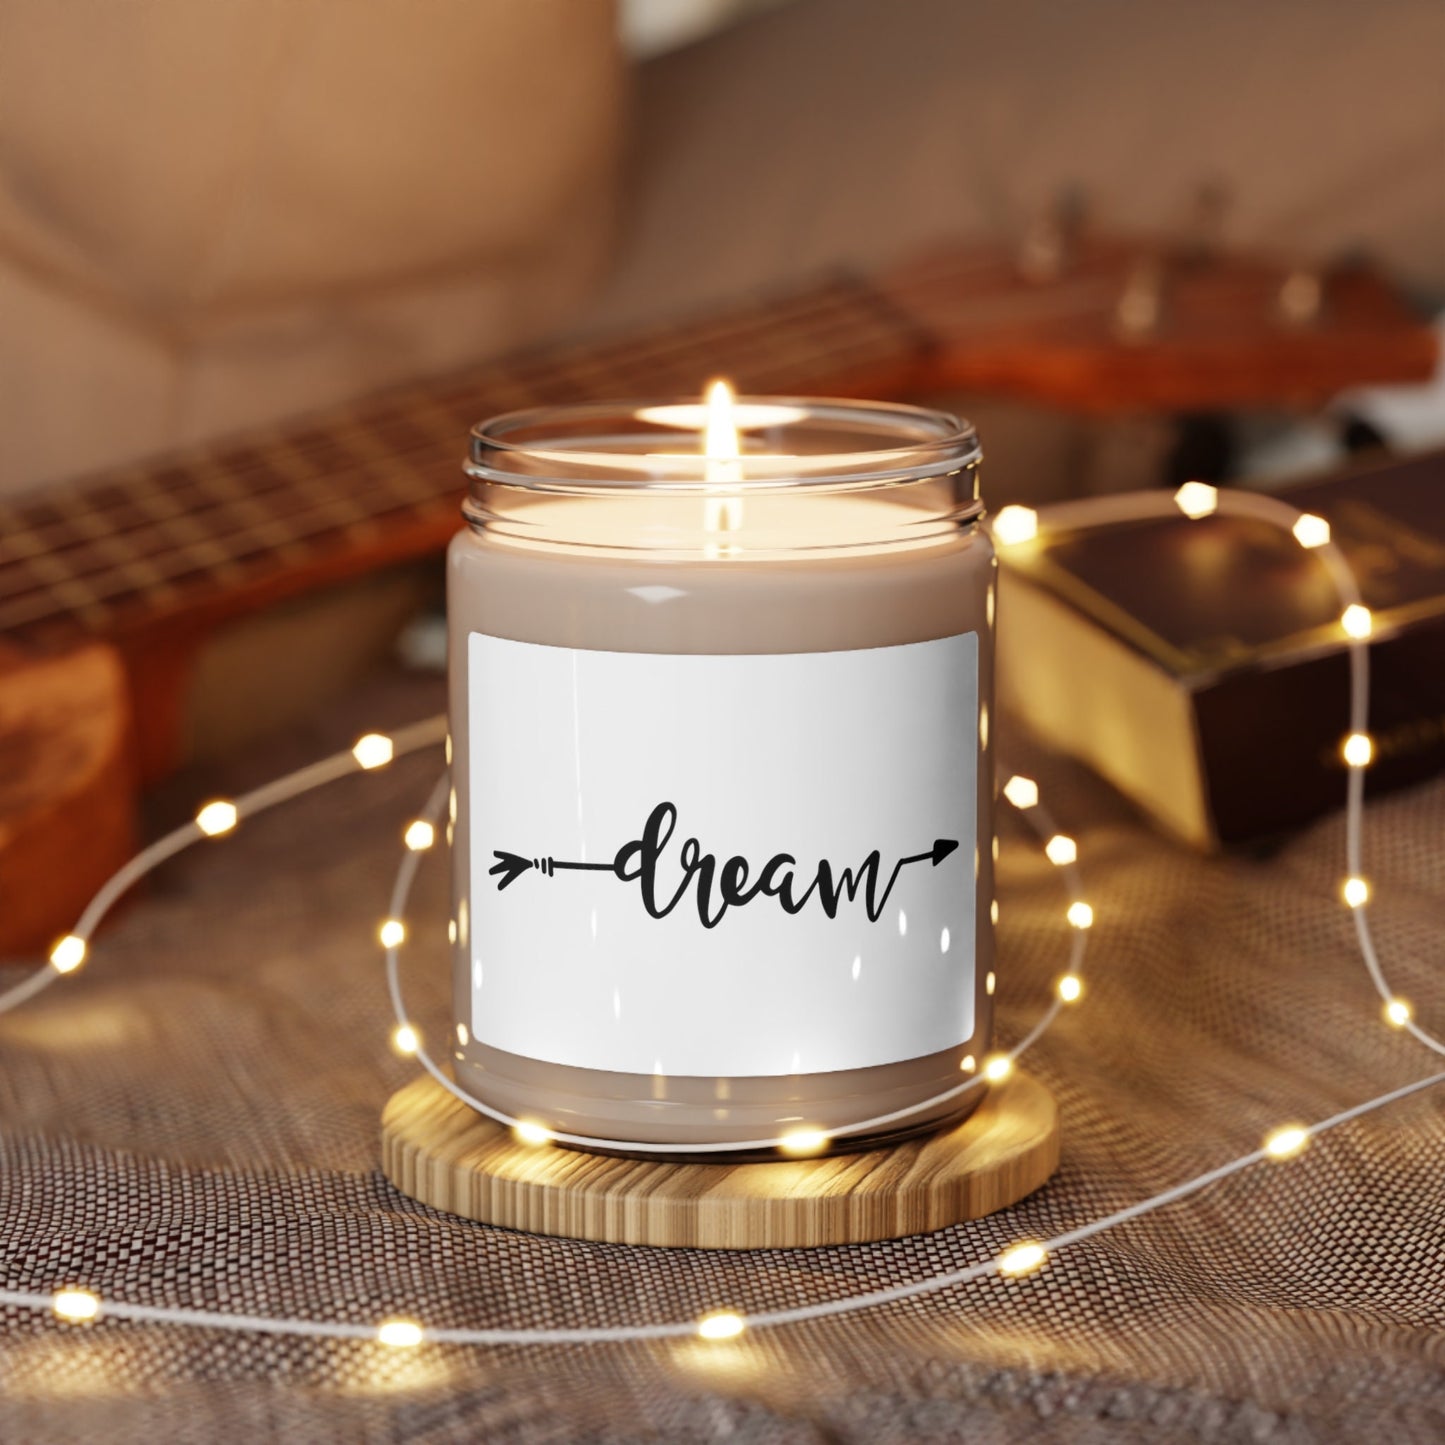 Dream Scented Soy Candle, 9oz